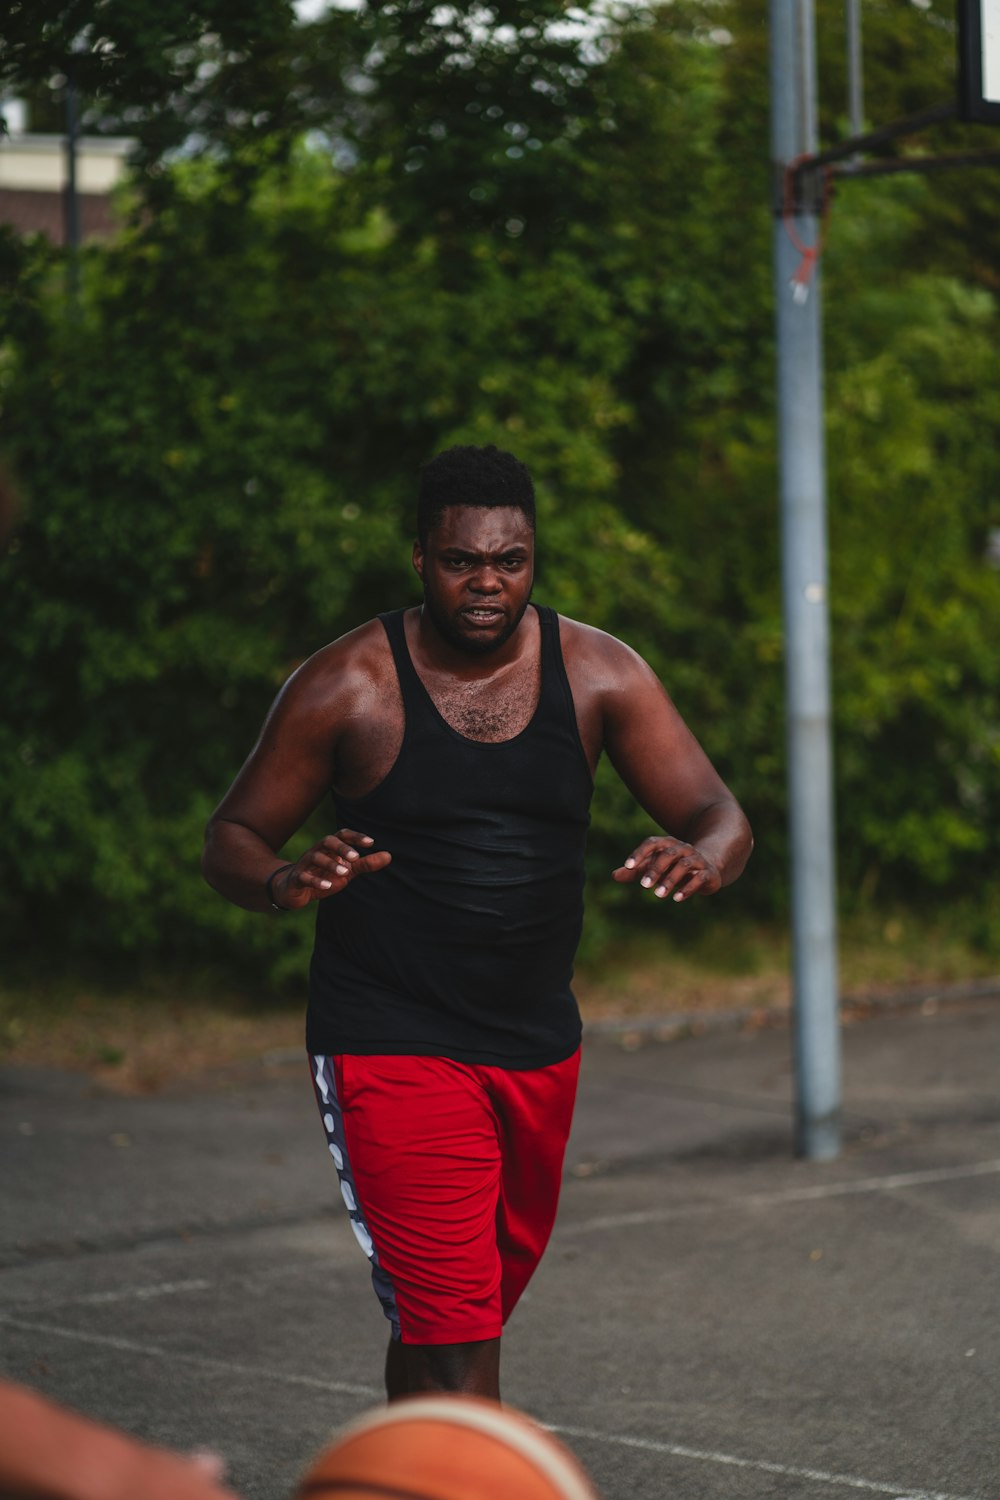 man in black tank top and red shorts running on road during daytime